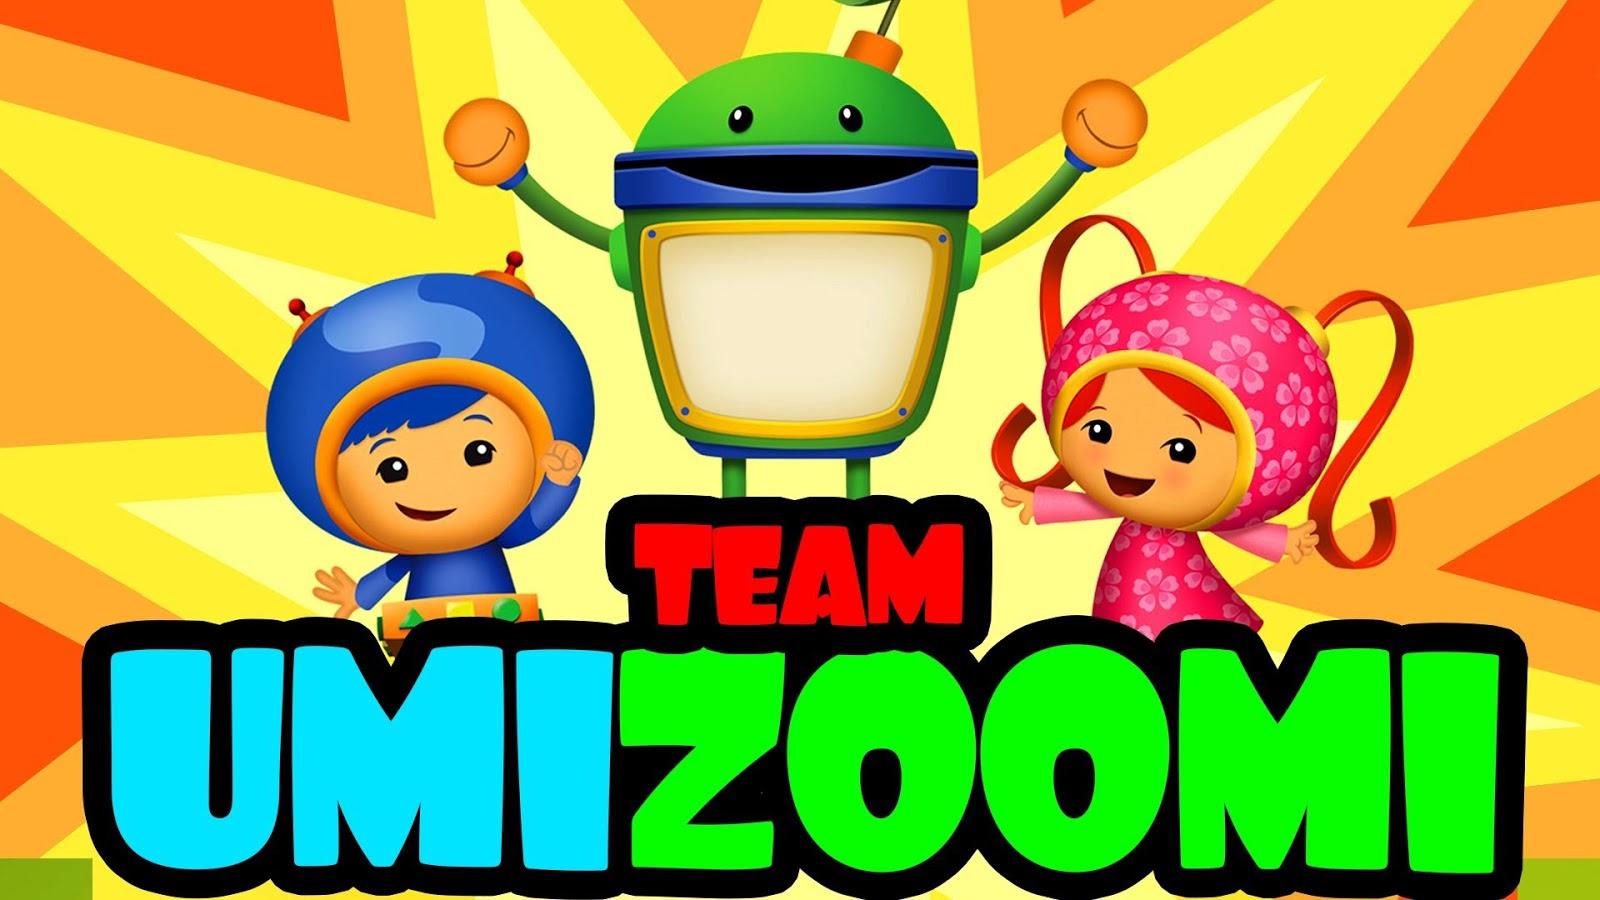 Showing Media & Posts for Team umizoomi tv series logo